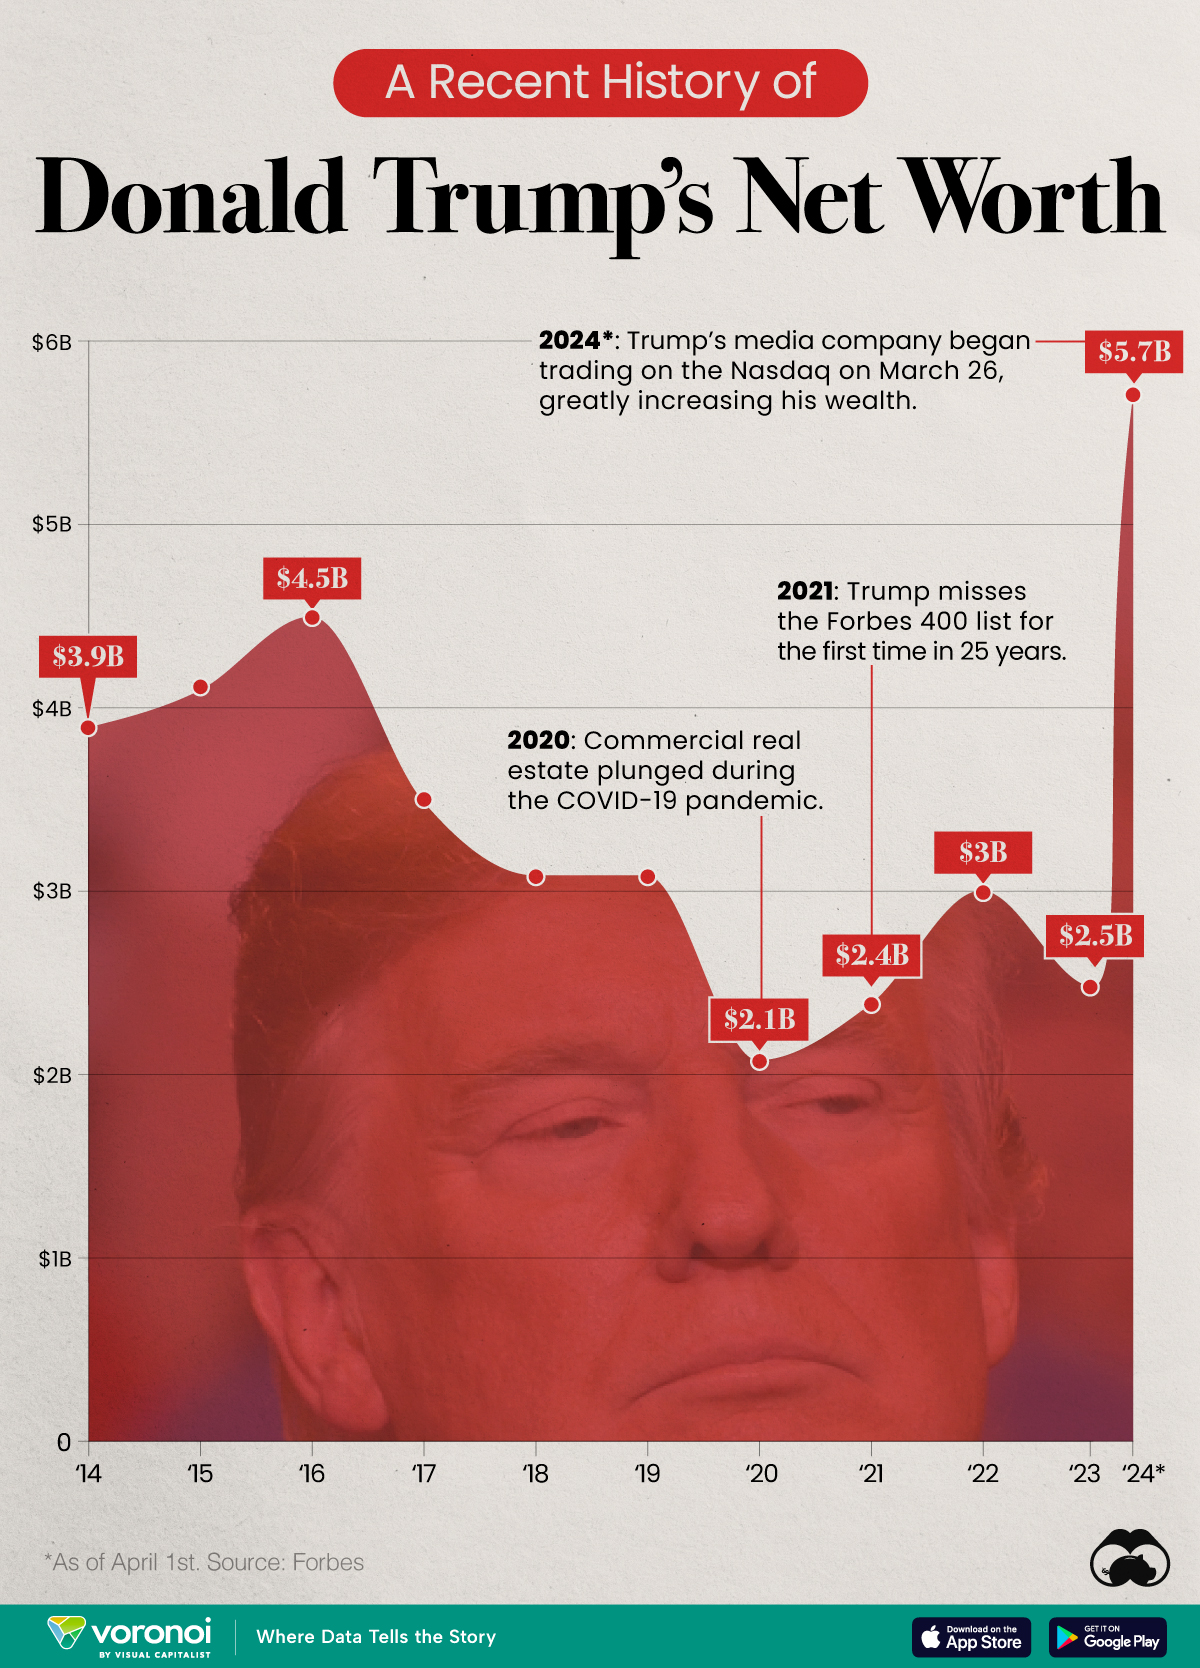 Chart showing the net worth of Donald Trump from 2014 to 2024